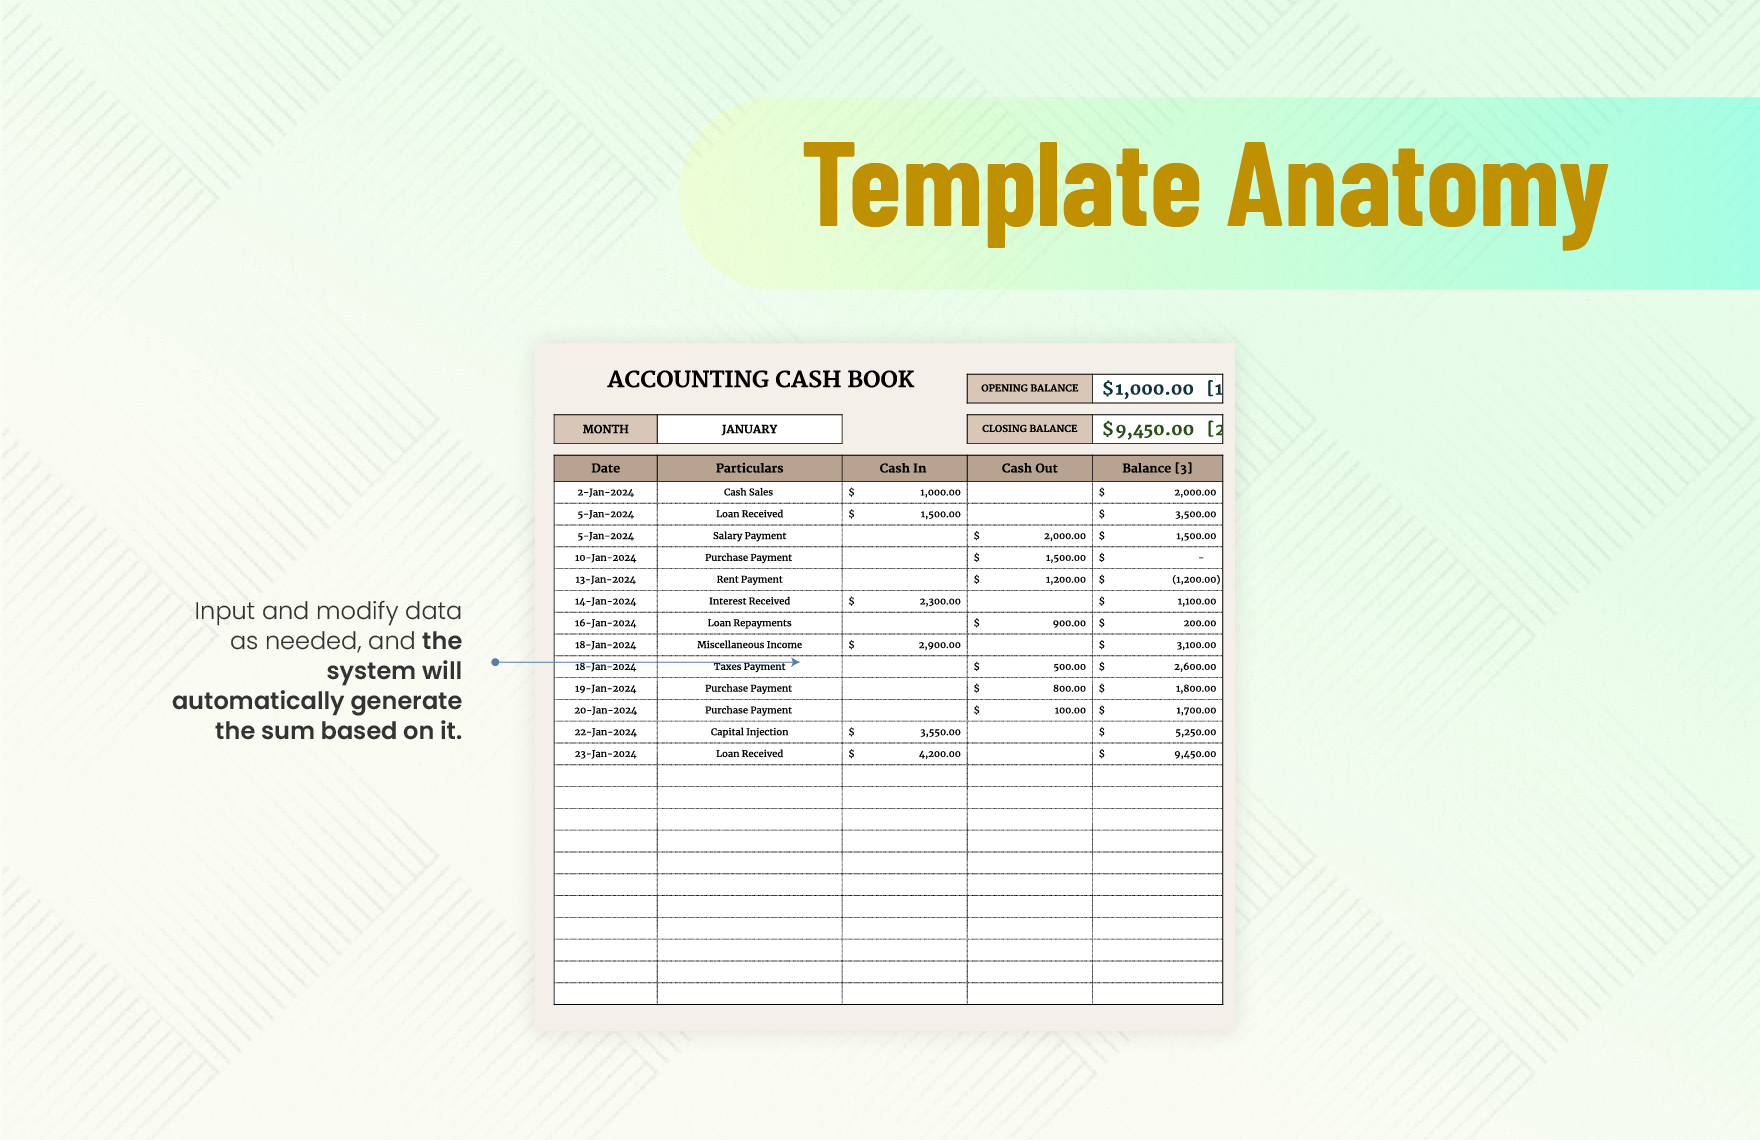 Accounting Cash Book Template